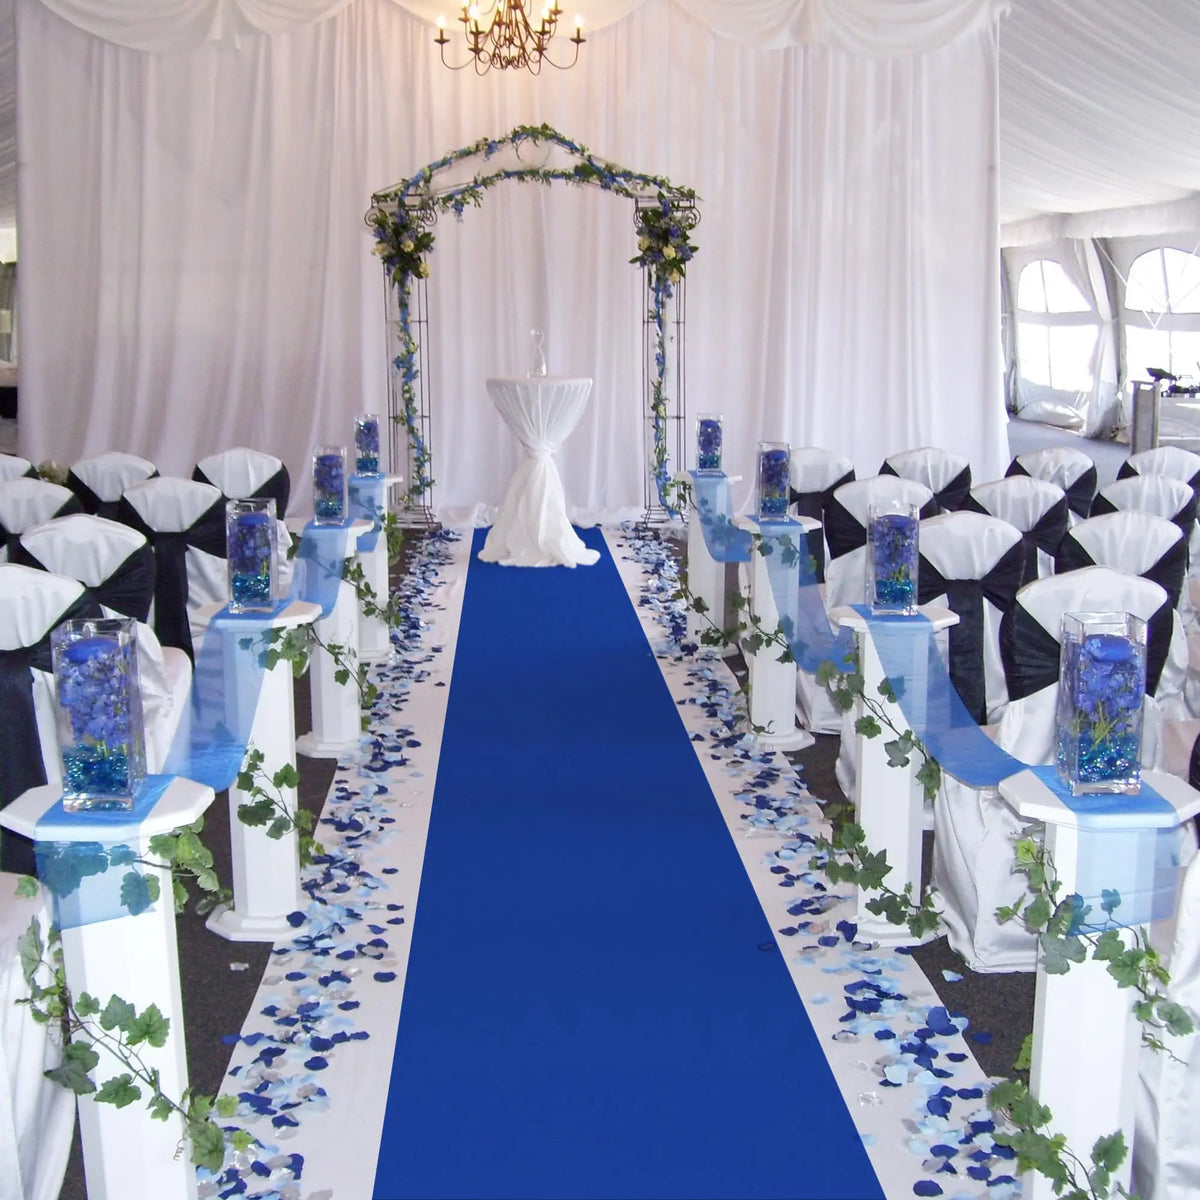 a wedding ceremony setup with blue and white decorations